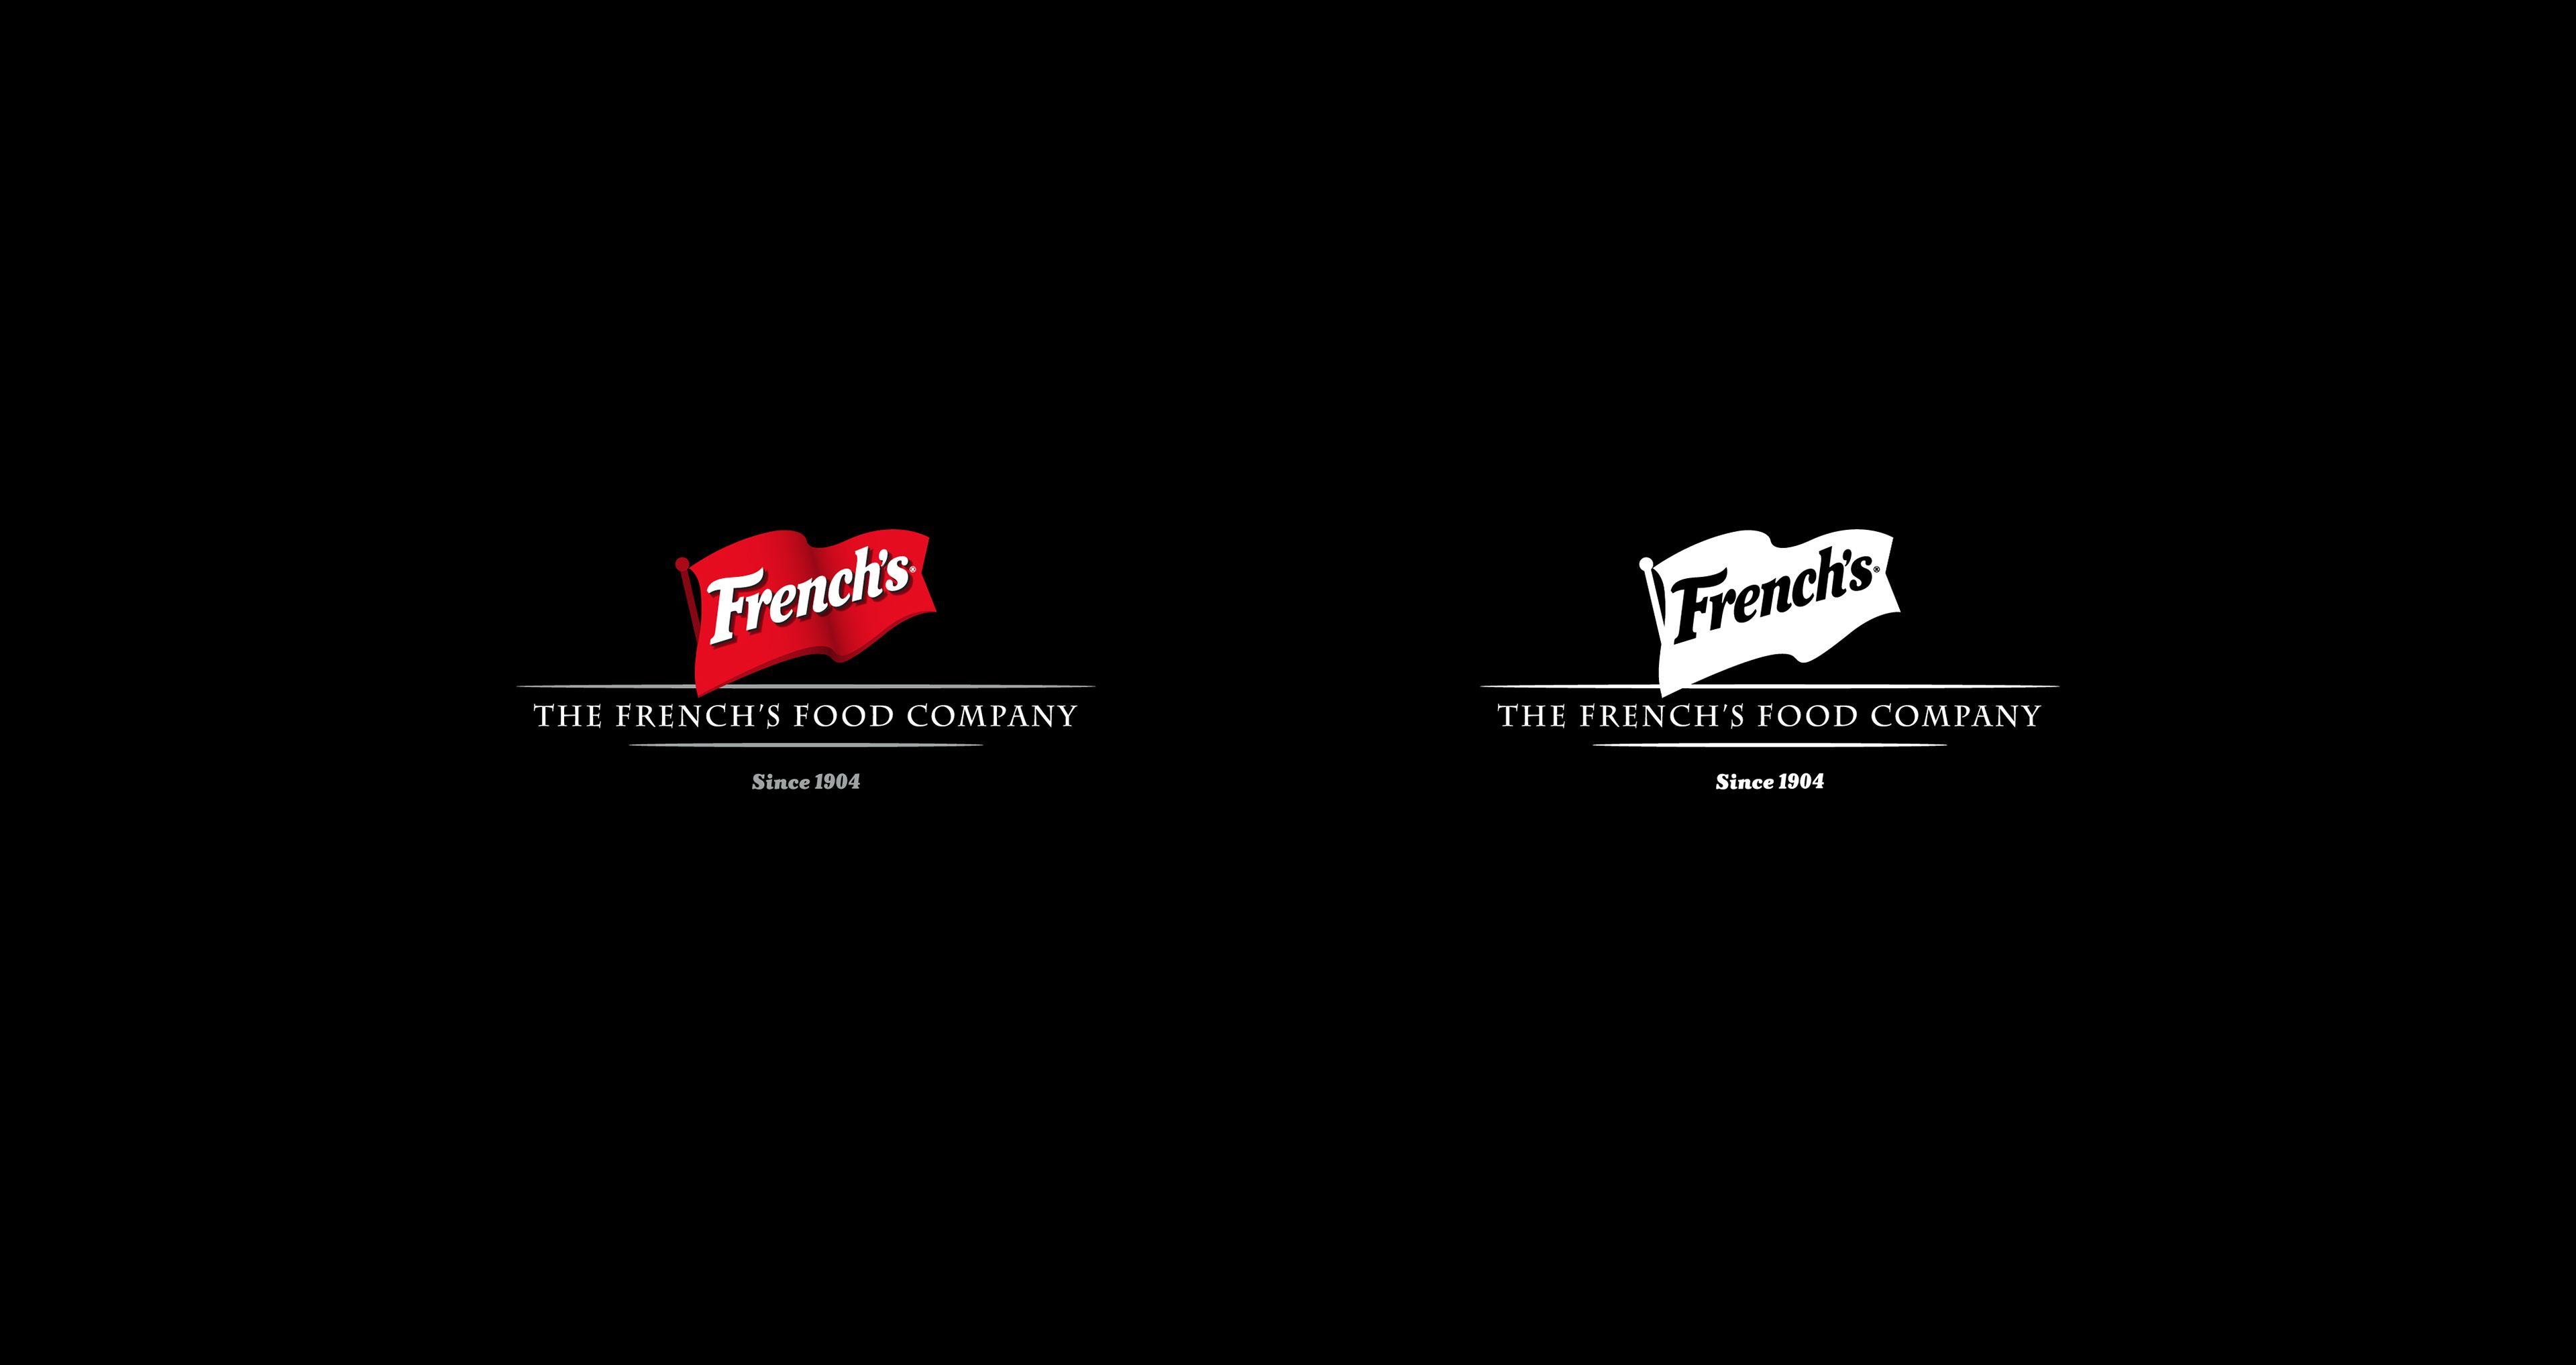 French Food Company Logo - The French's Food Company